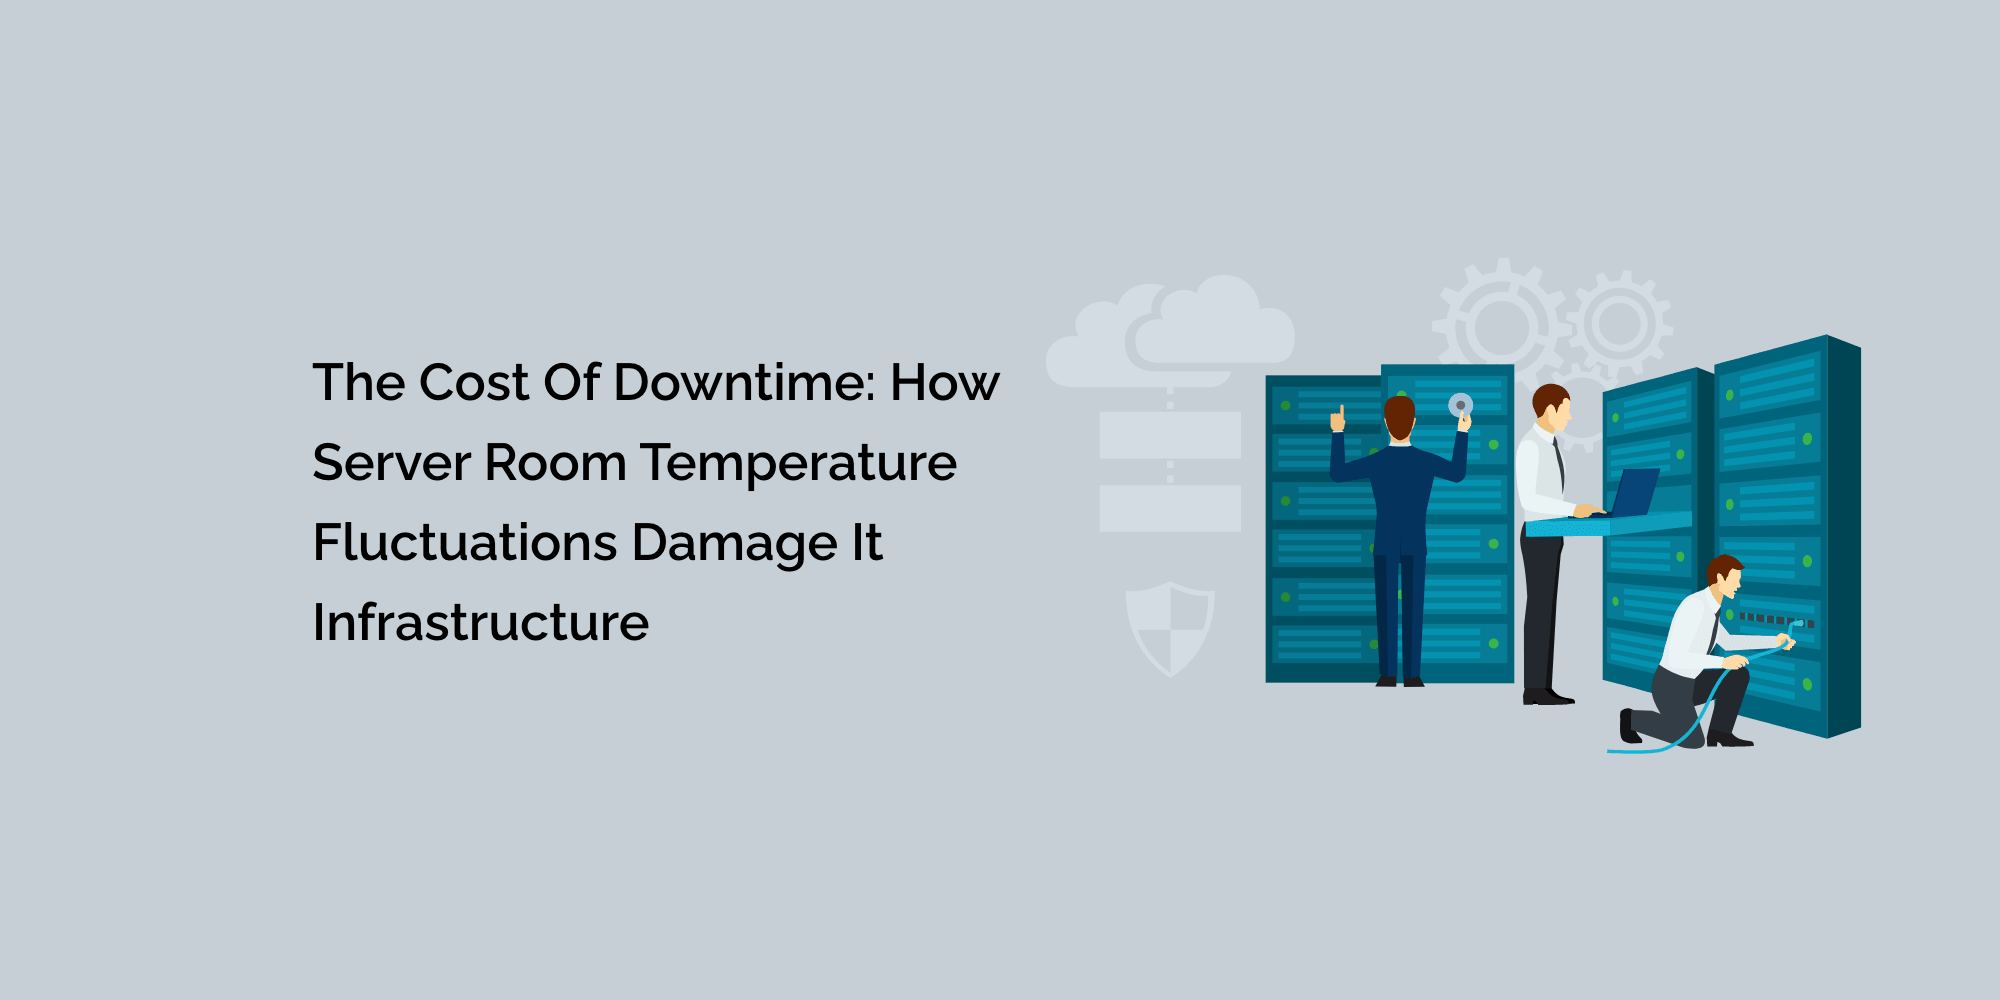 The Cost of Downtime: How Server Room Temperature Fluctuations Damage IT Infrastructure